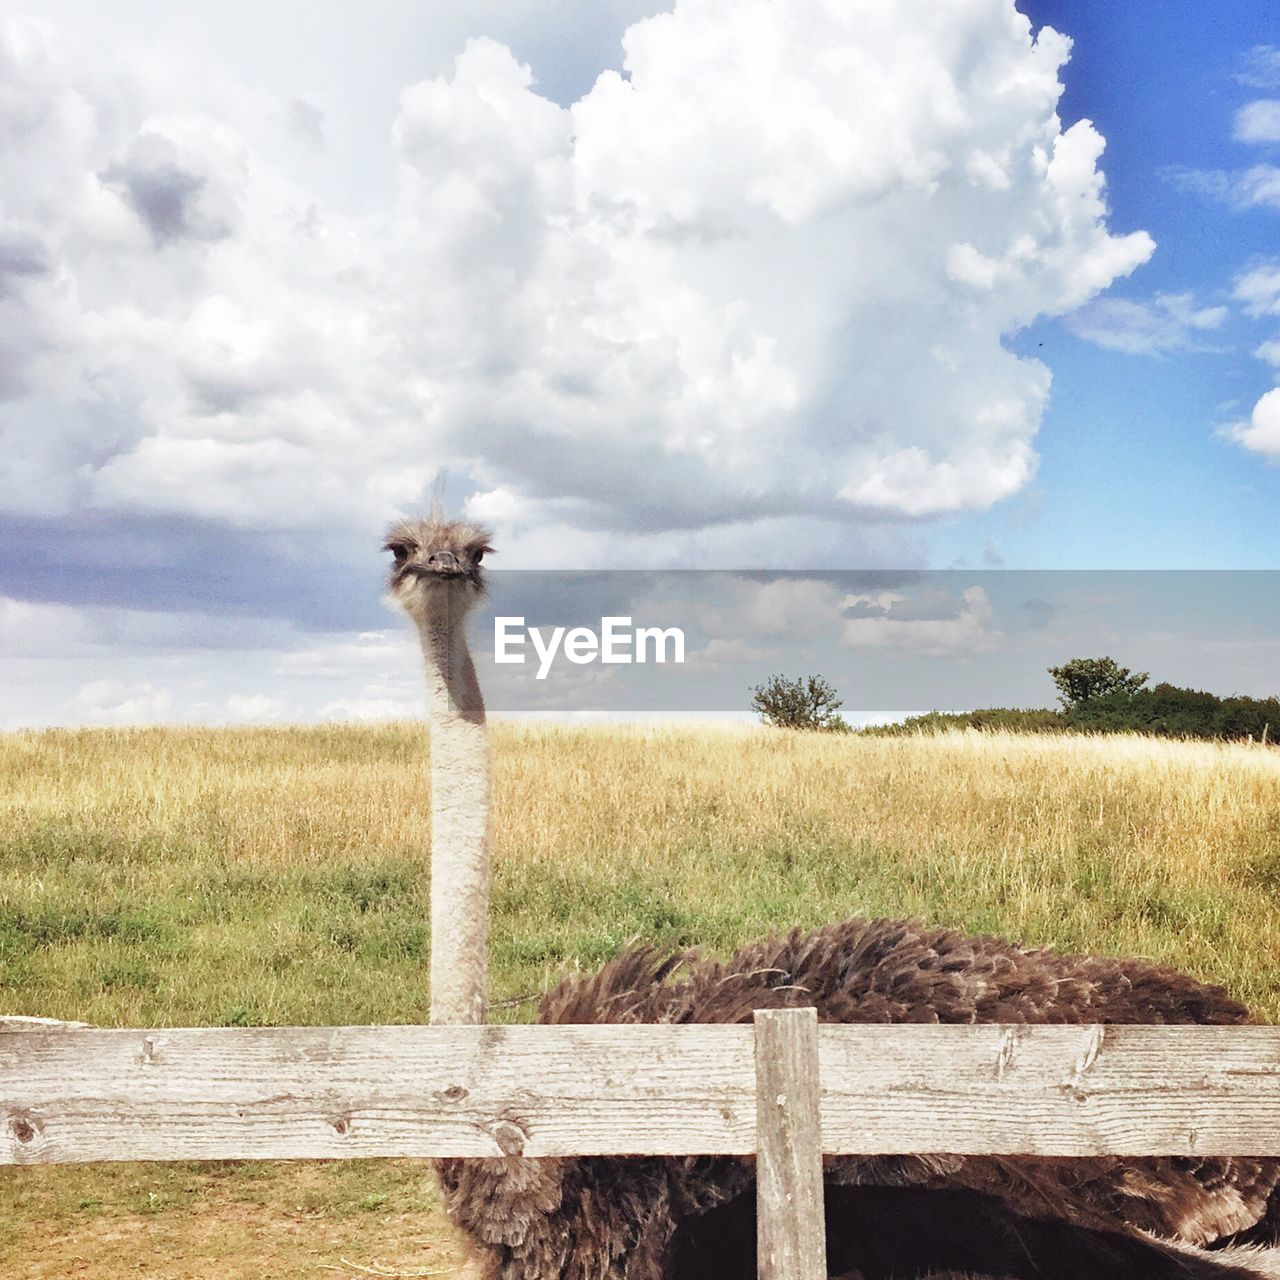 Ostrich on field against cloudy sky